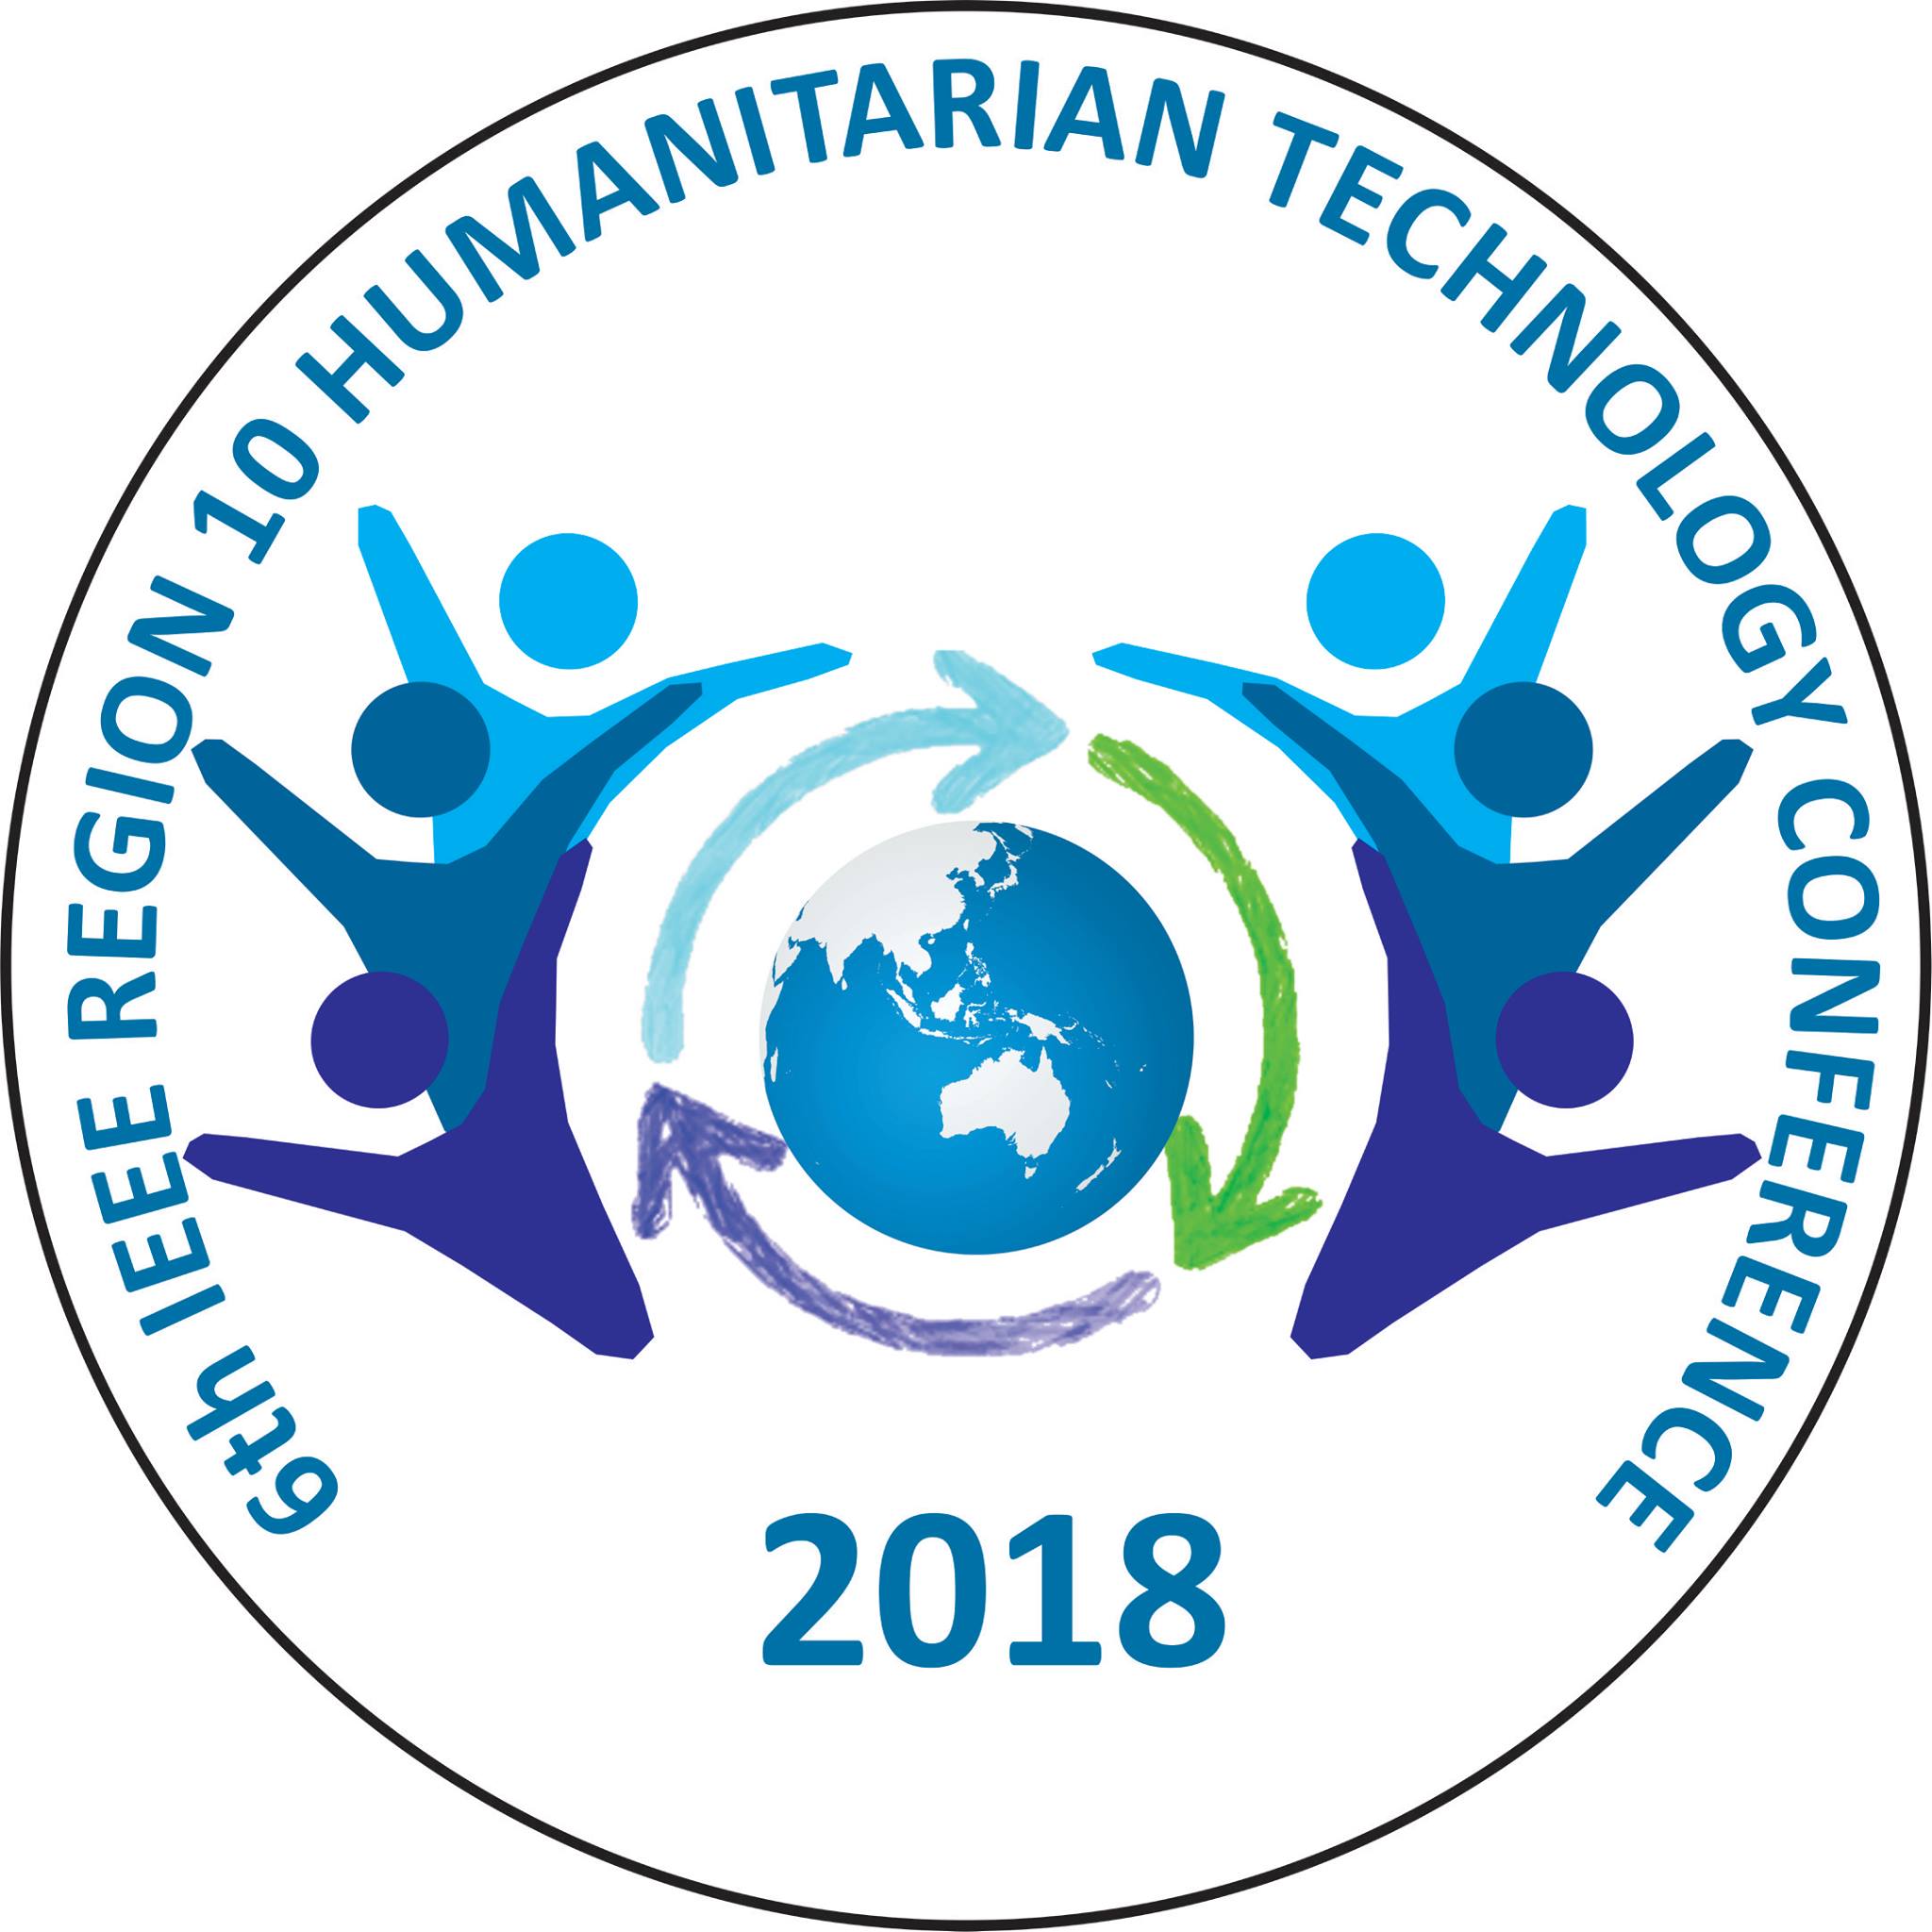 IEEE Region 10 Humanitarian Technology Conference 2018